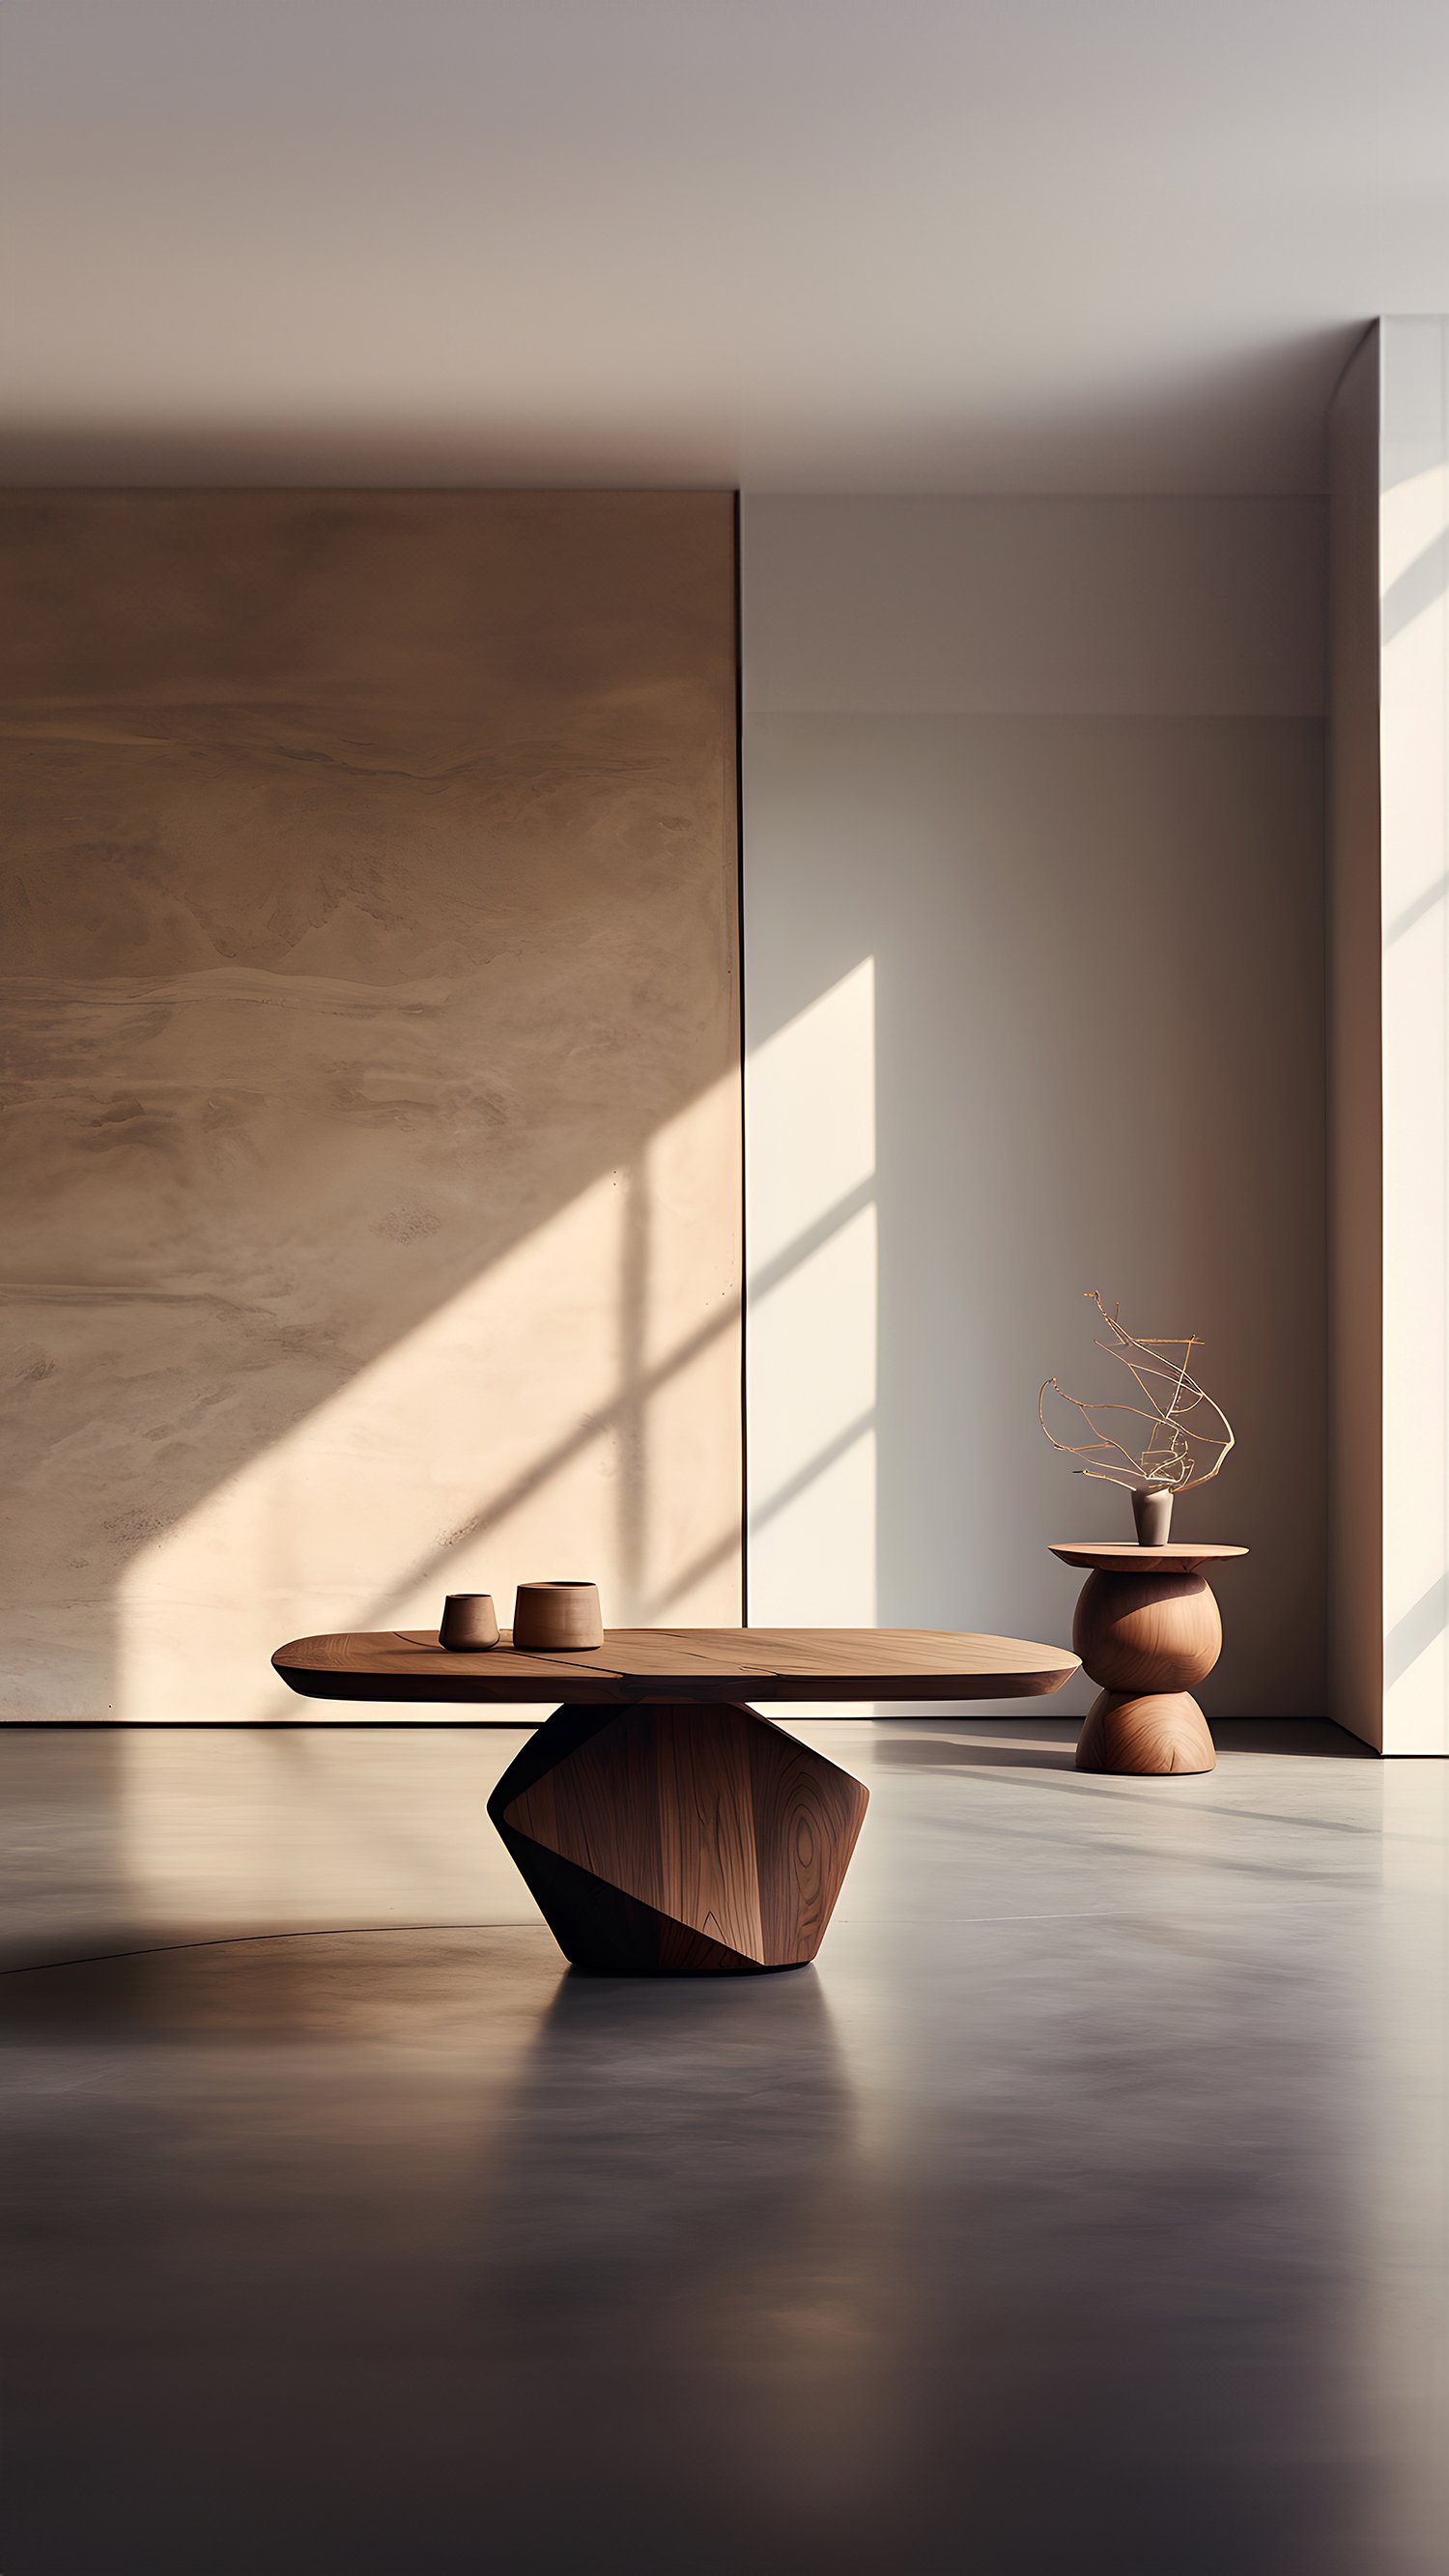 Sculptural Coffee Table Made of Solid Wood, Center Table Solace S30 by Joel Escalona — 7.jpg